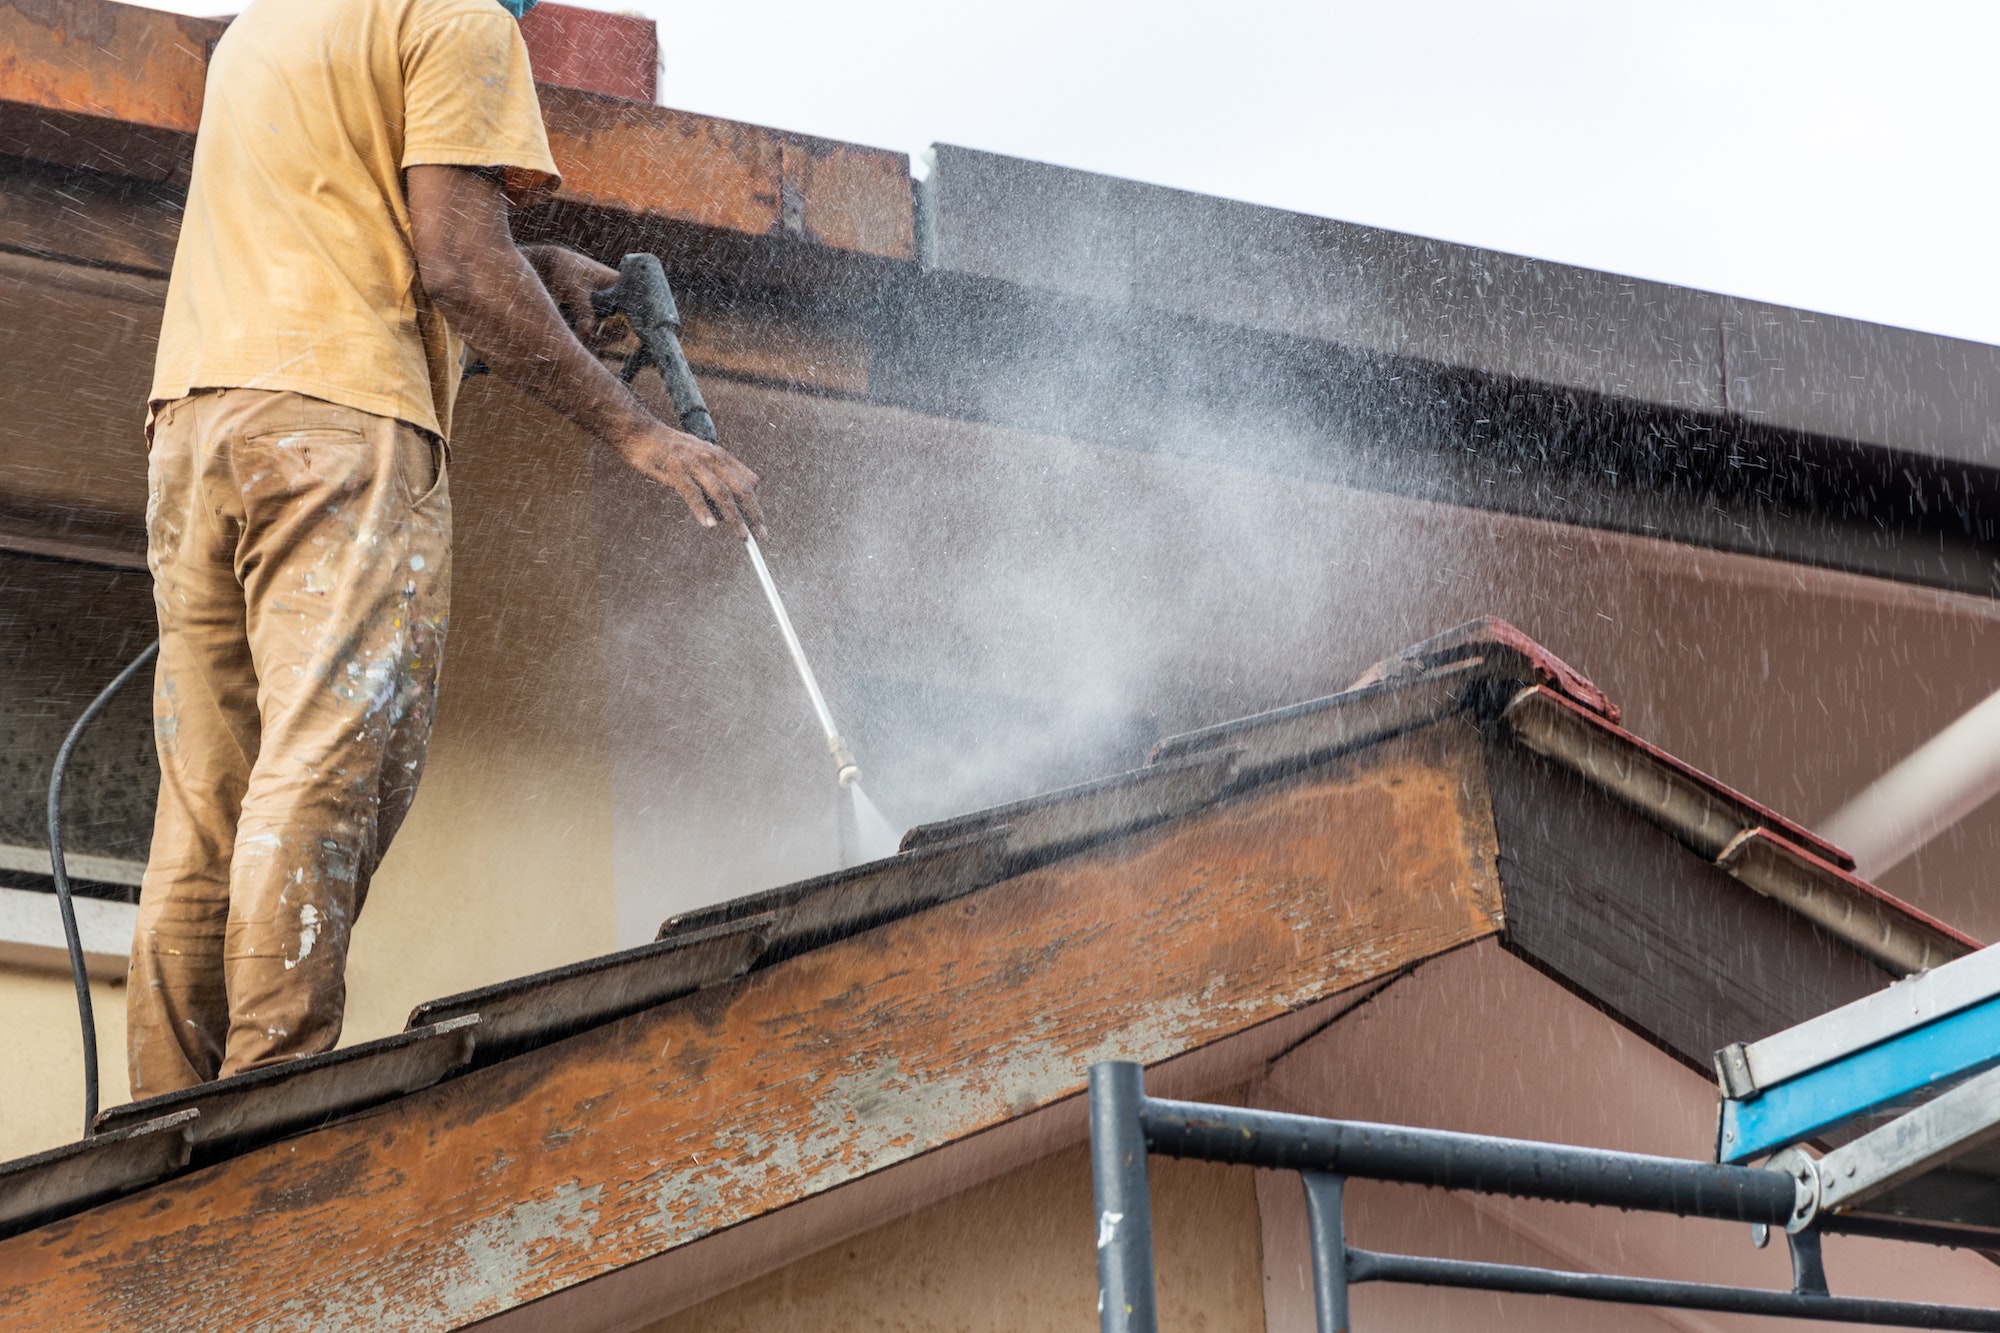 Worker using high pressure water jet spray gun to wash and clean dirt from rooftop tiles in